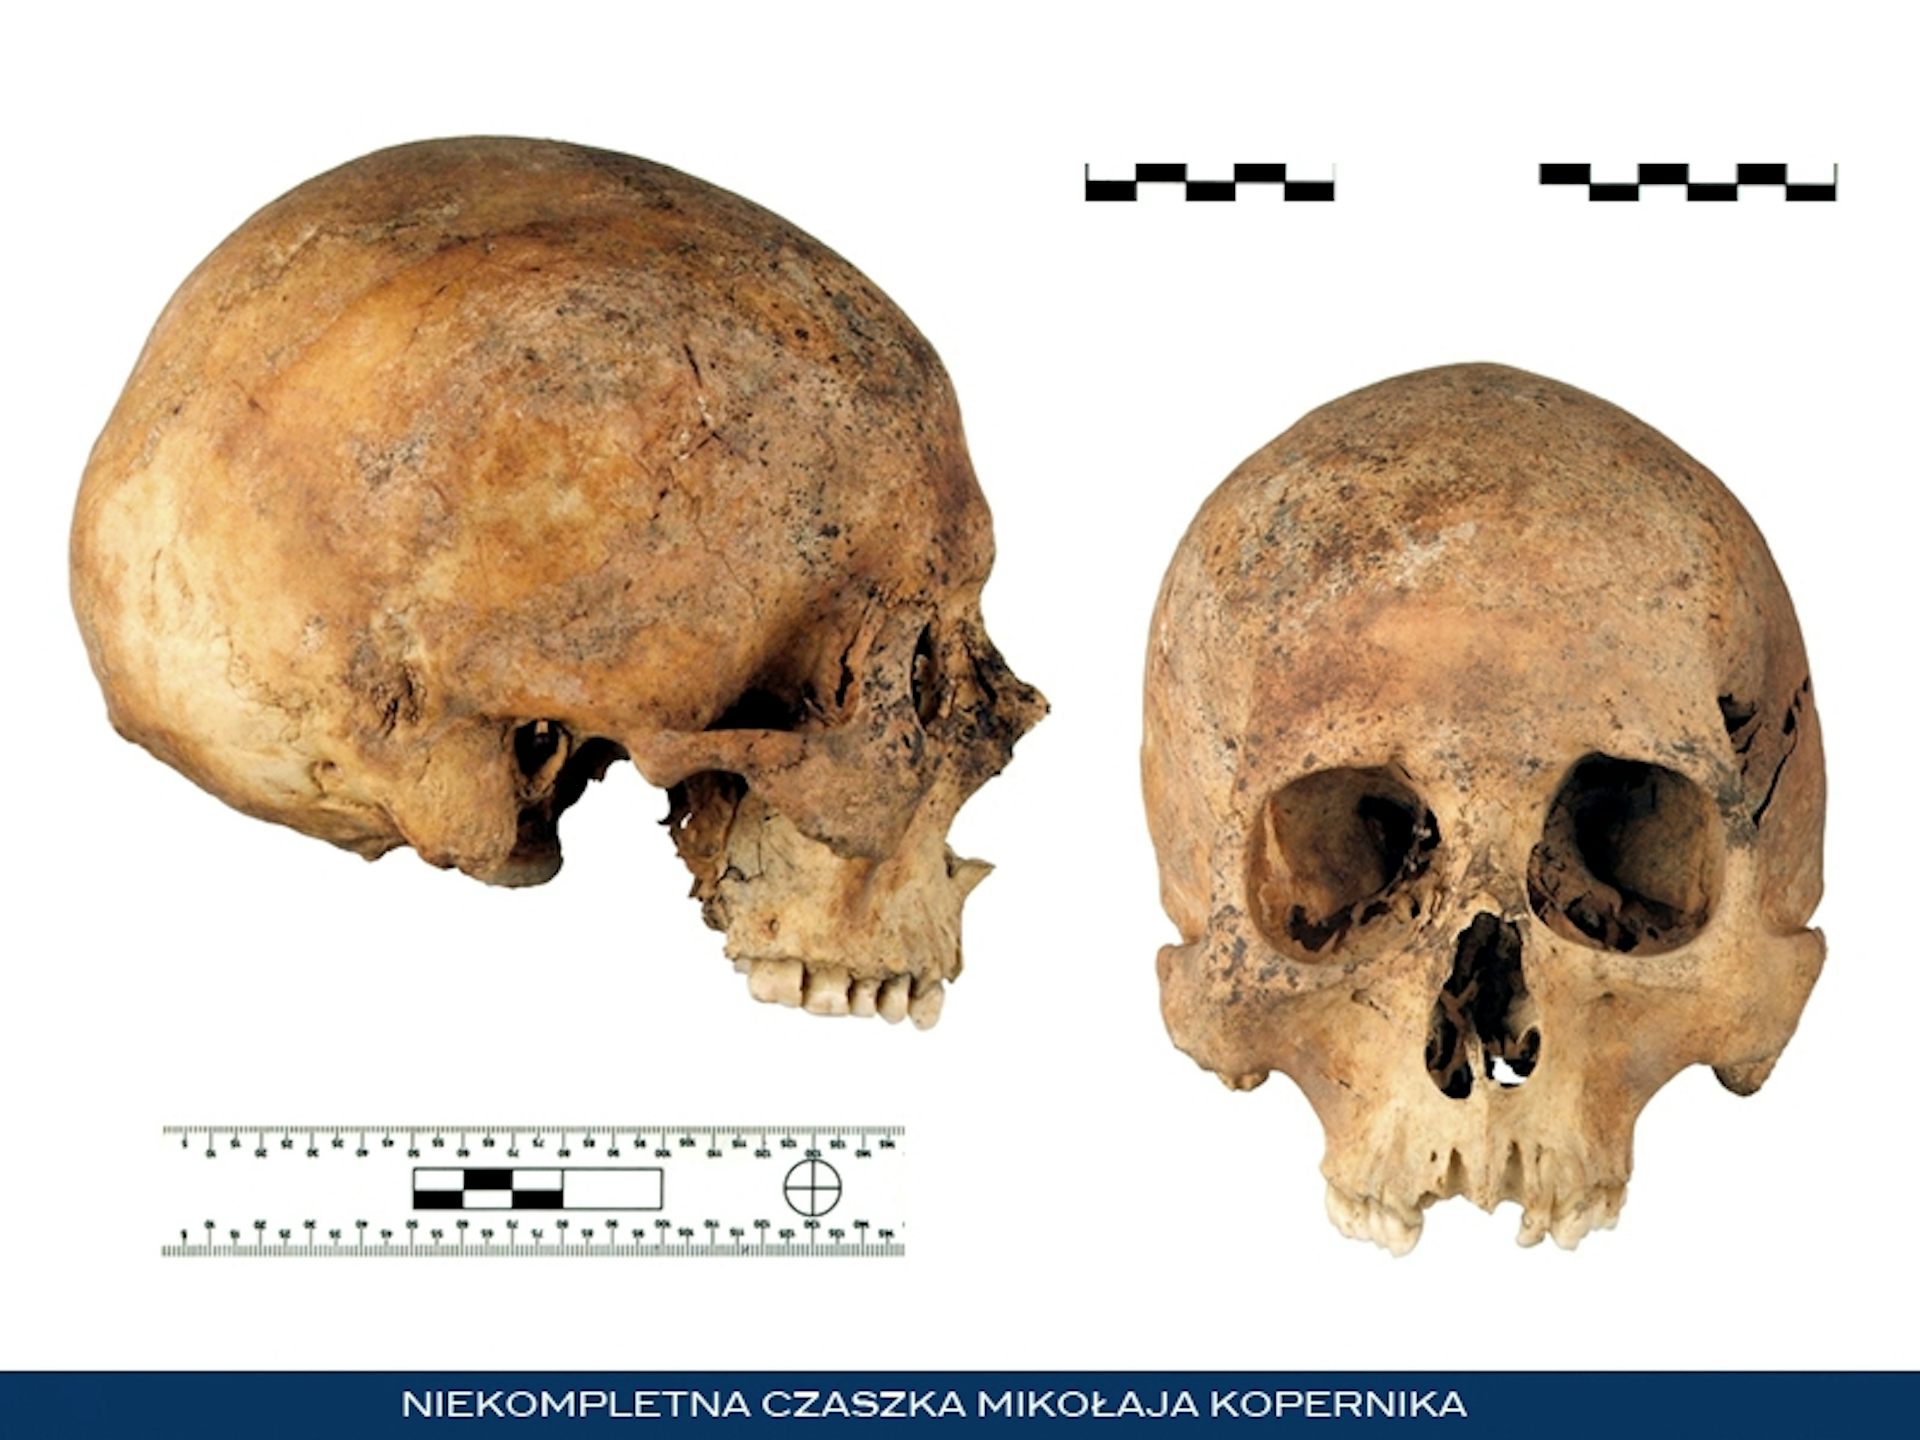 Photos of a human skull from the front and side with a ruler indicating size.